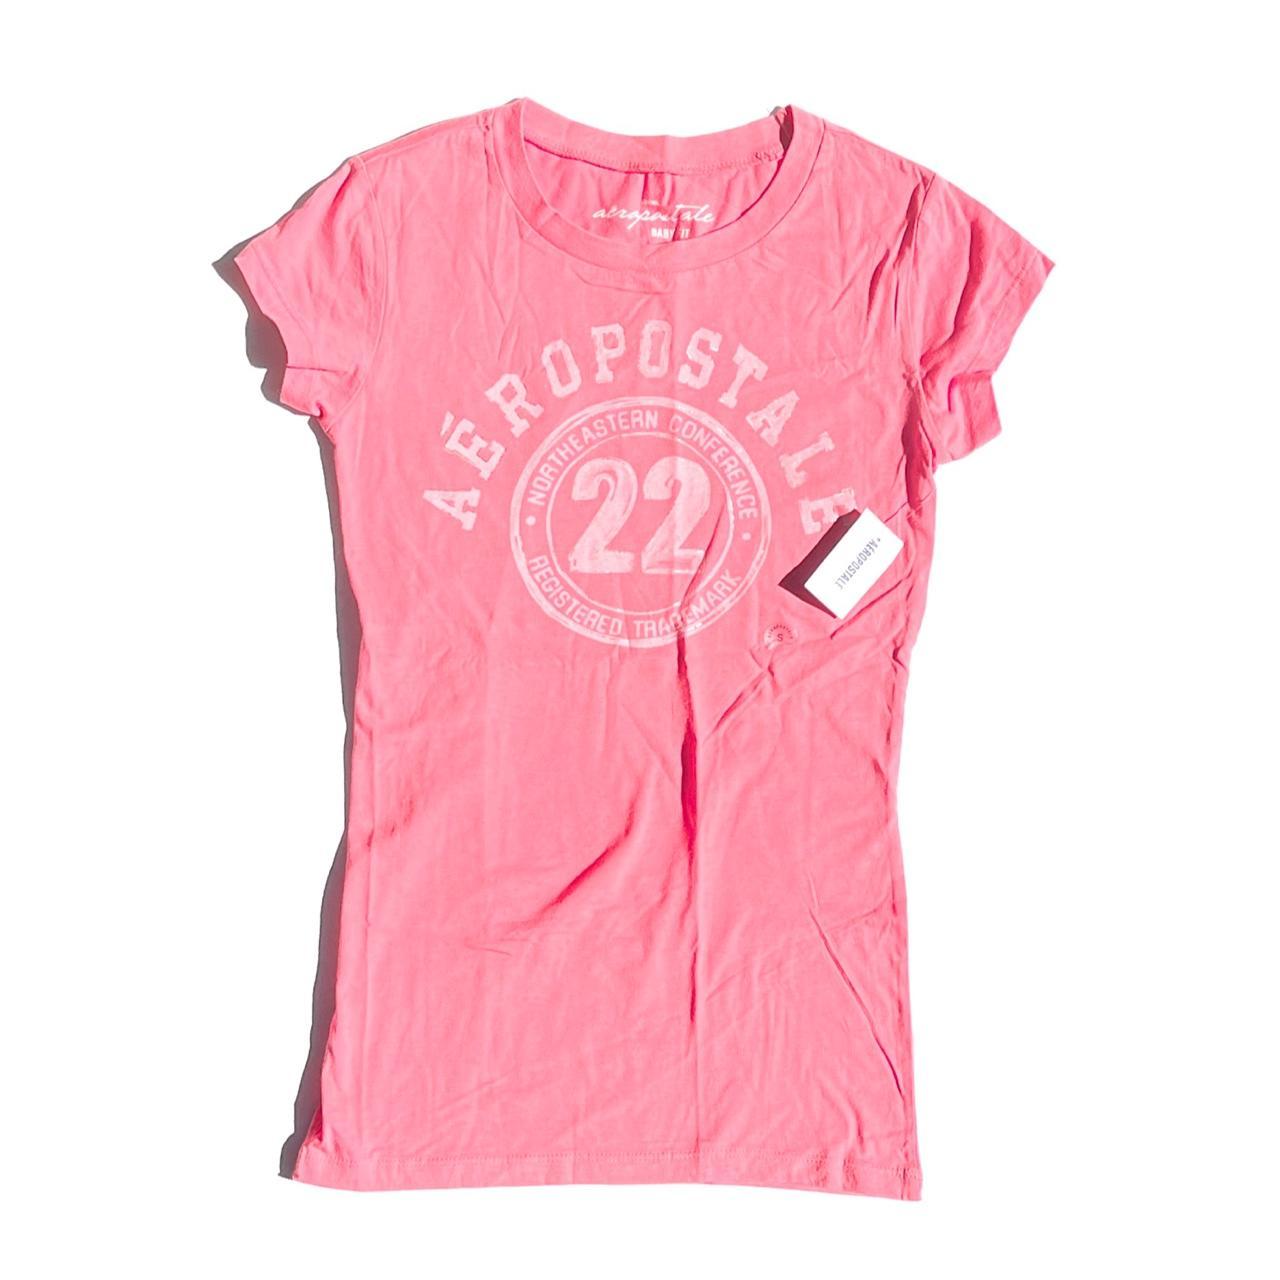 Aeropostale Women's White and Pink T-shirt